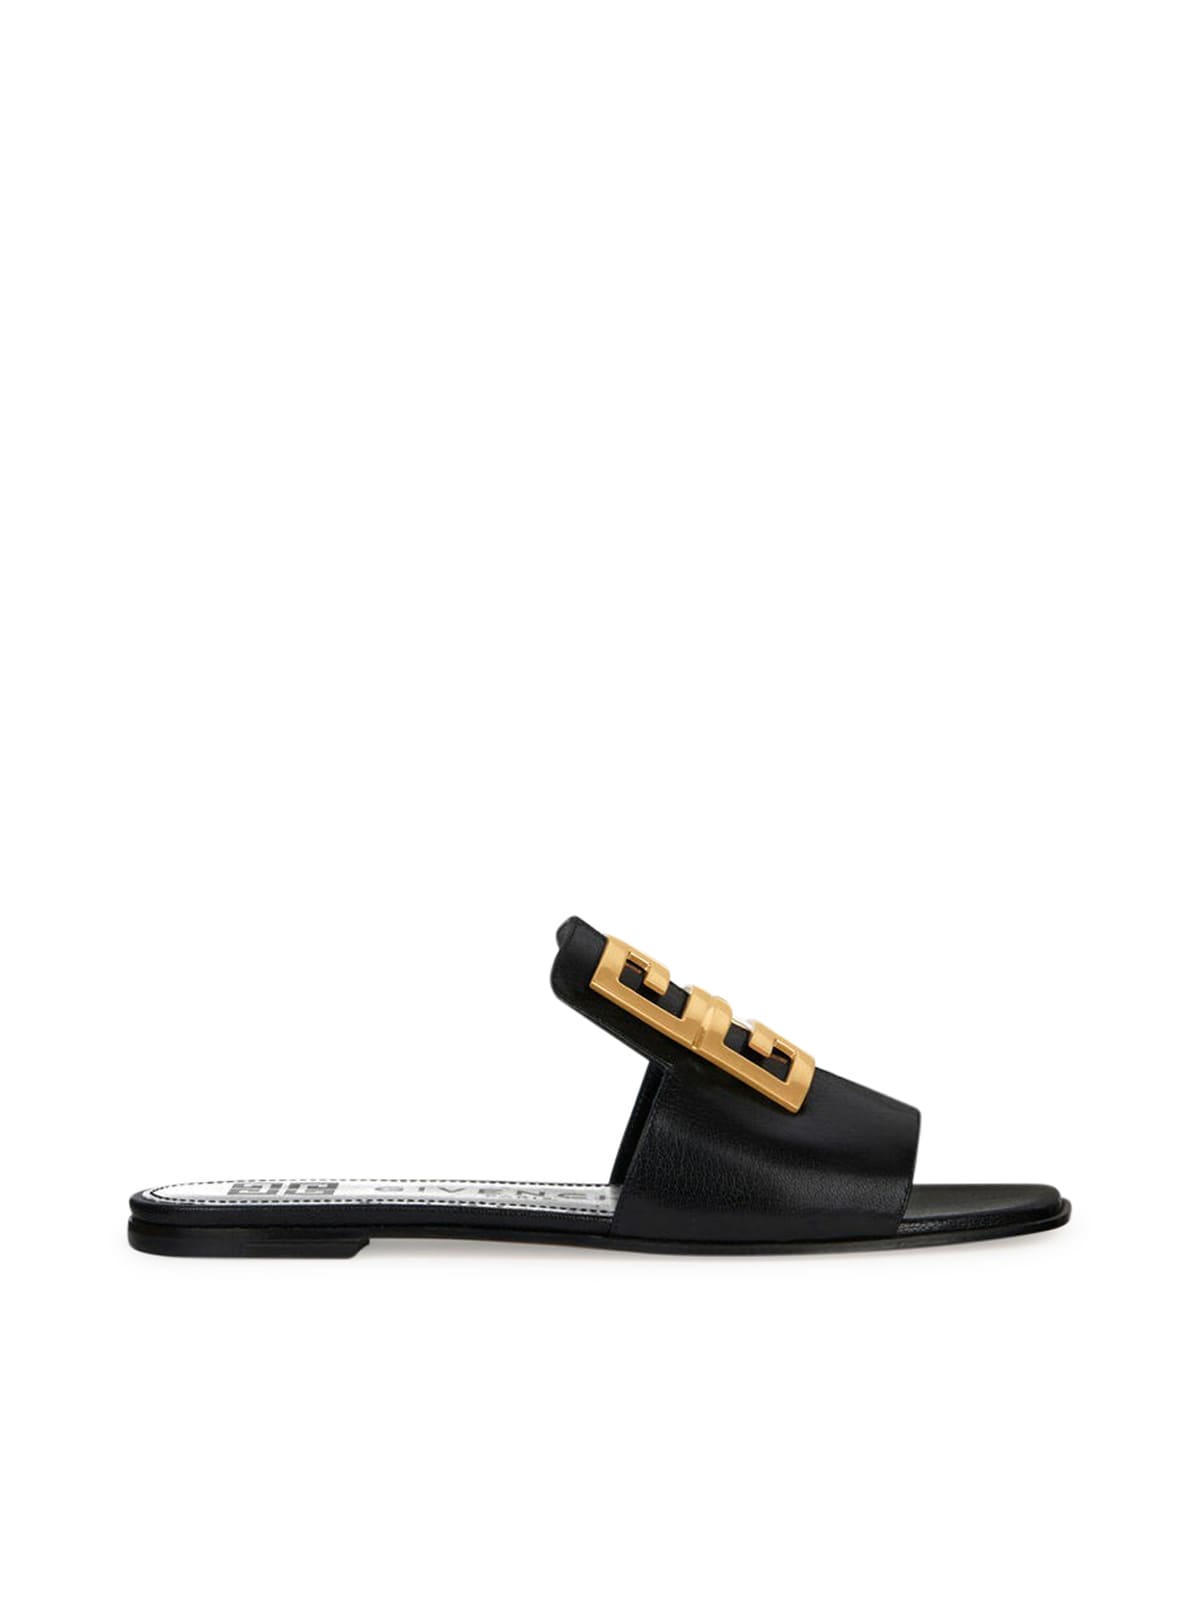 Buy Givenchy 4g Flat Sandal online, shop Givenchy shoes with free shipping